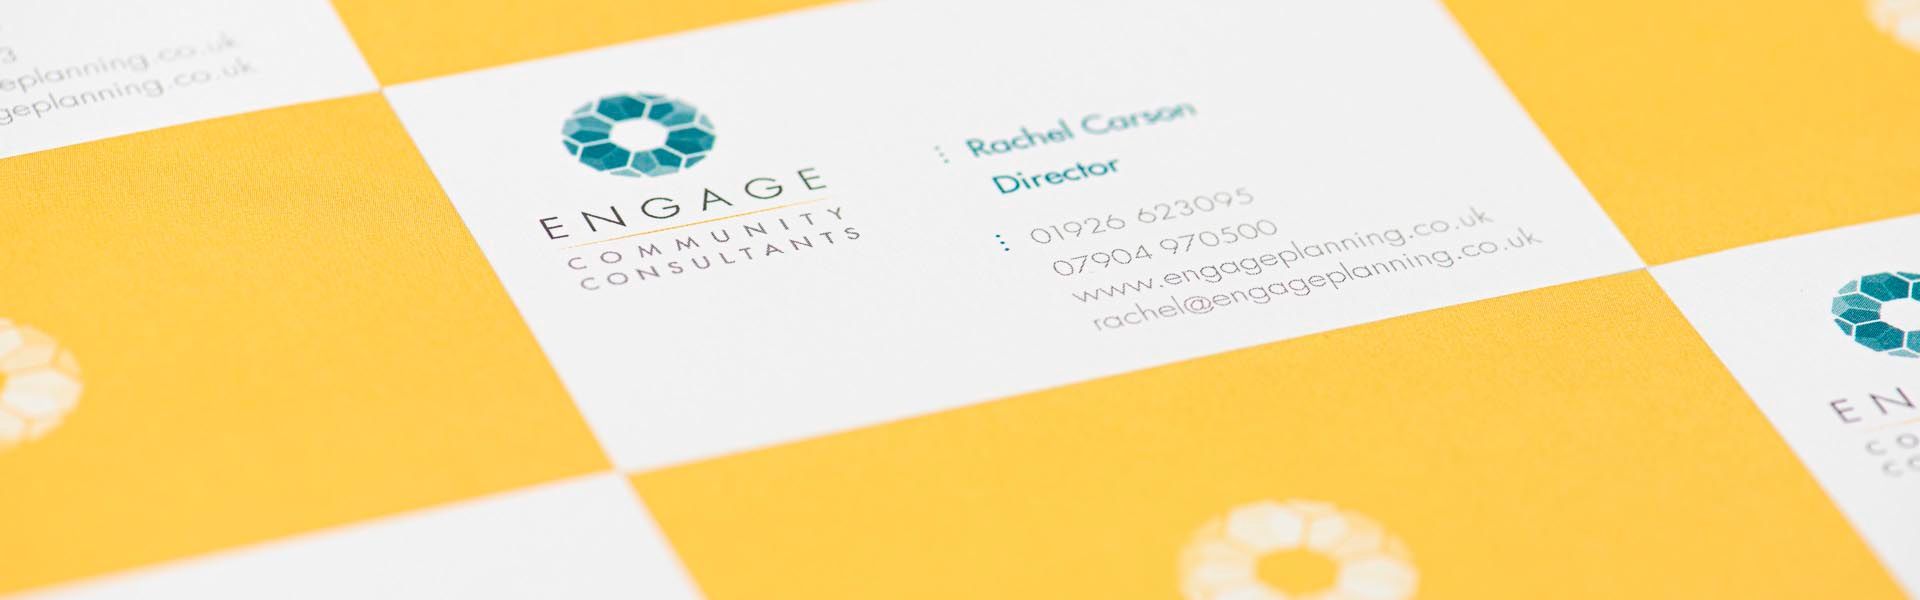 a close up of a business card for engage community consultants